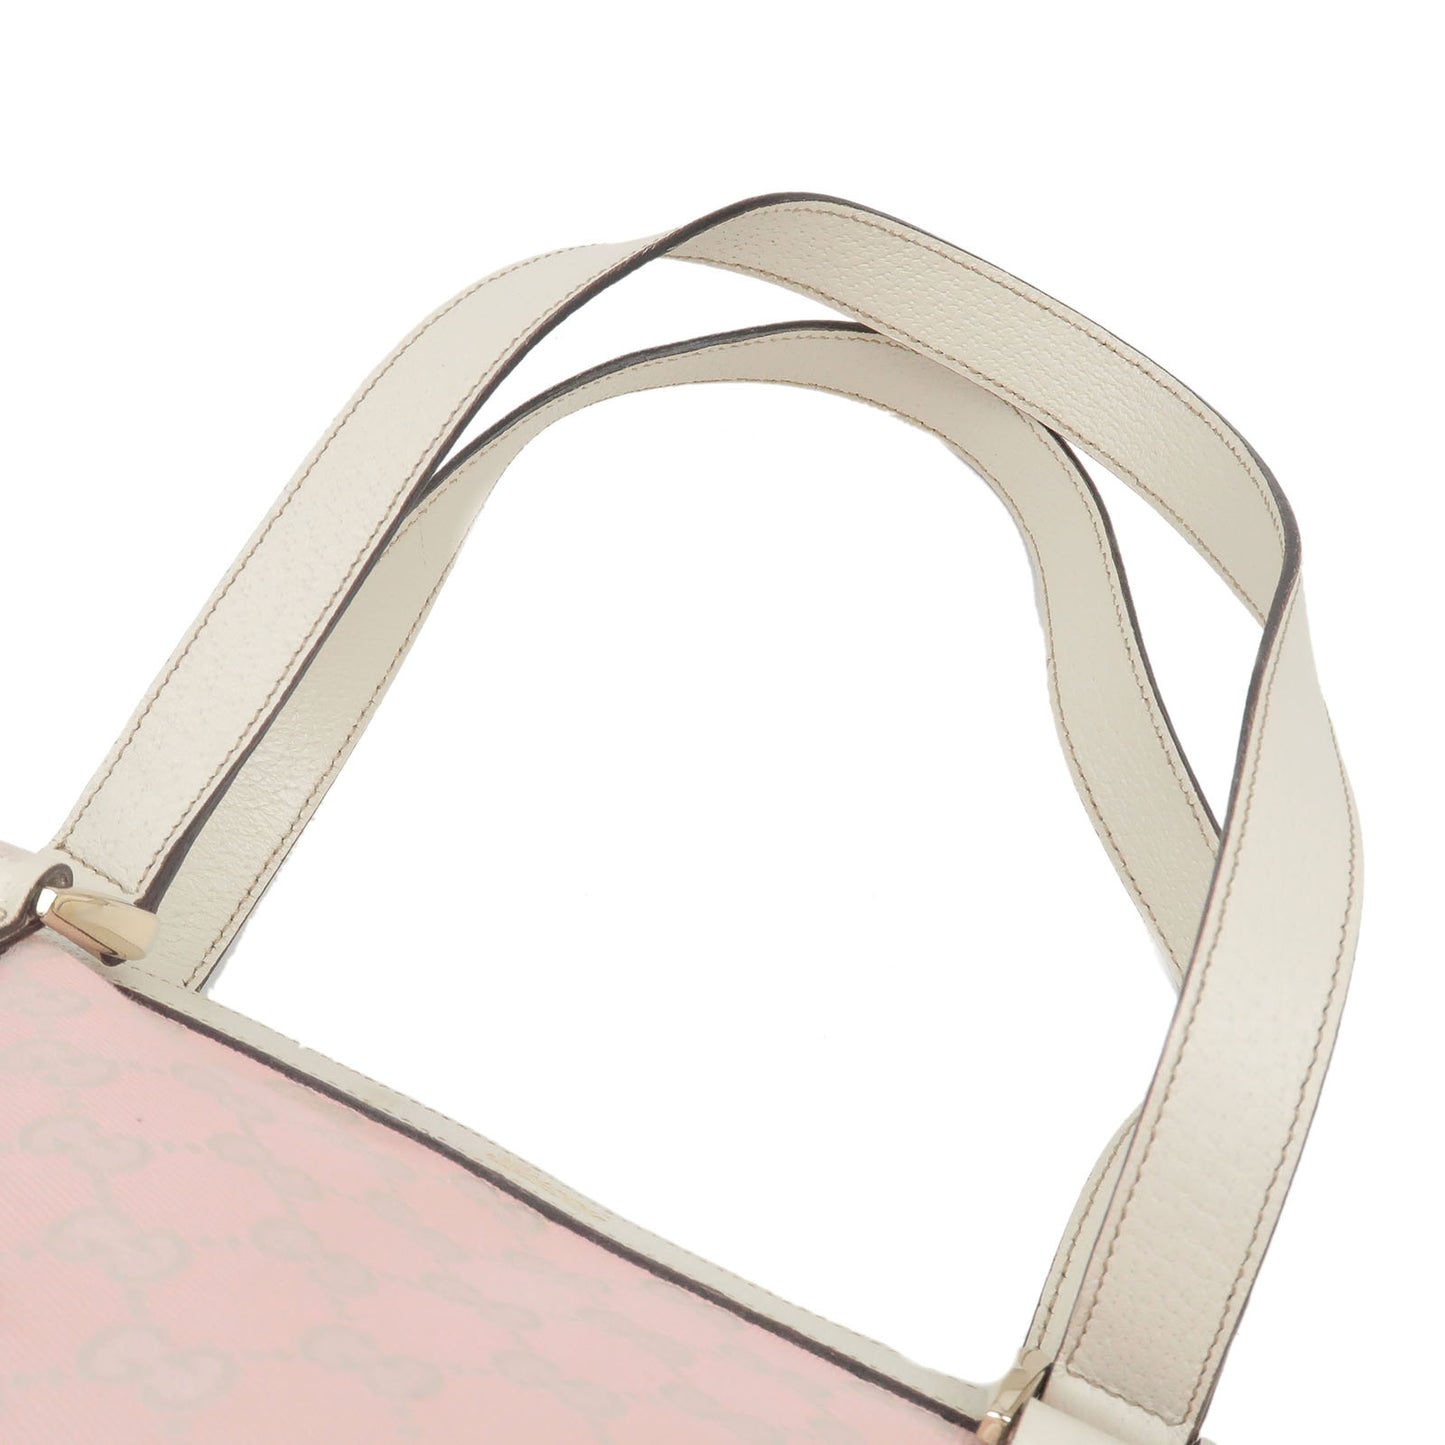 GUCCI GG Canvas Leather Tote Bag Pink White 141470